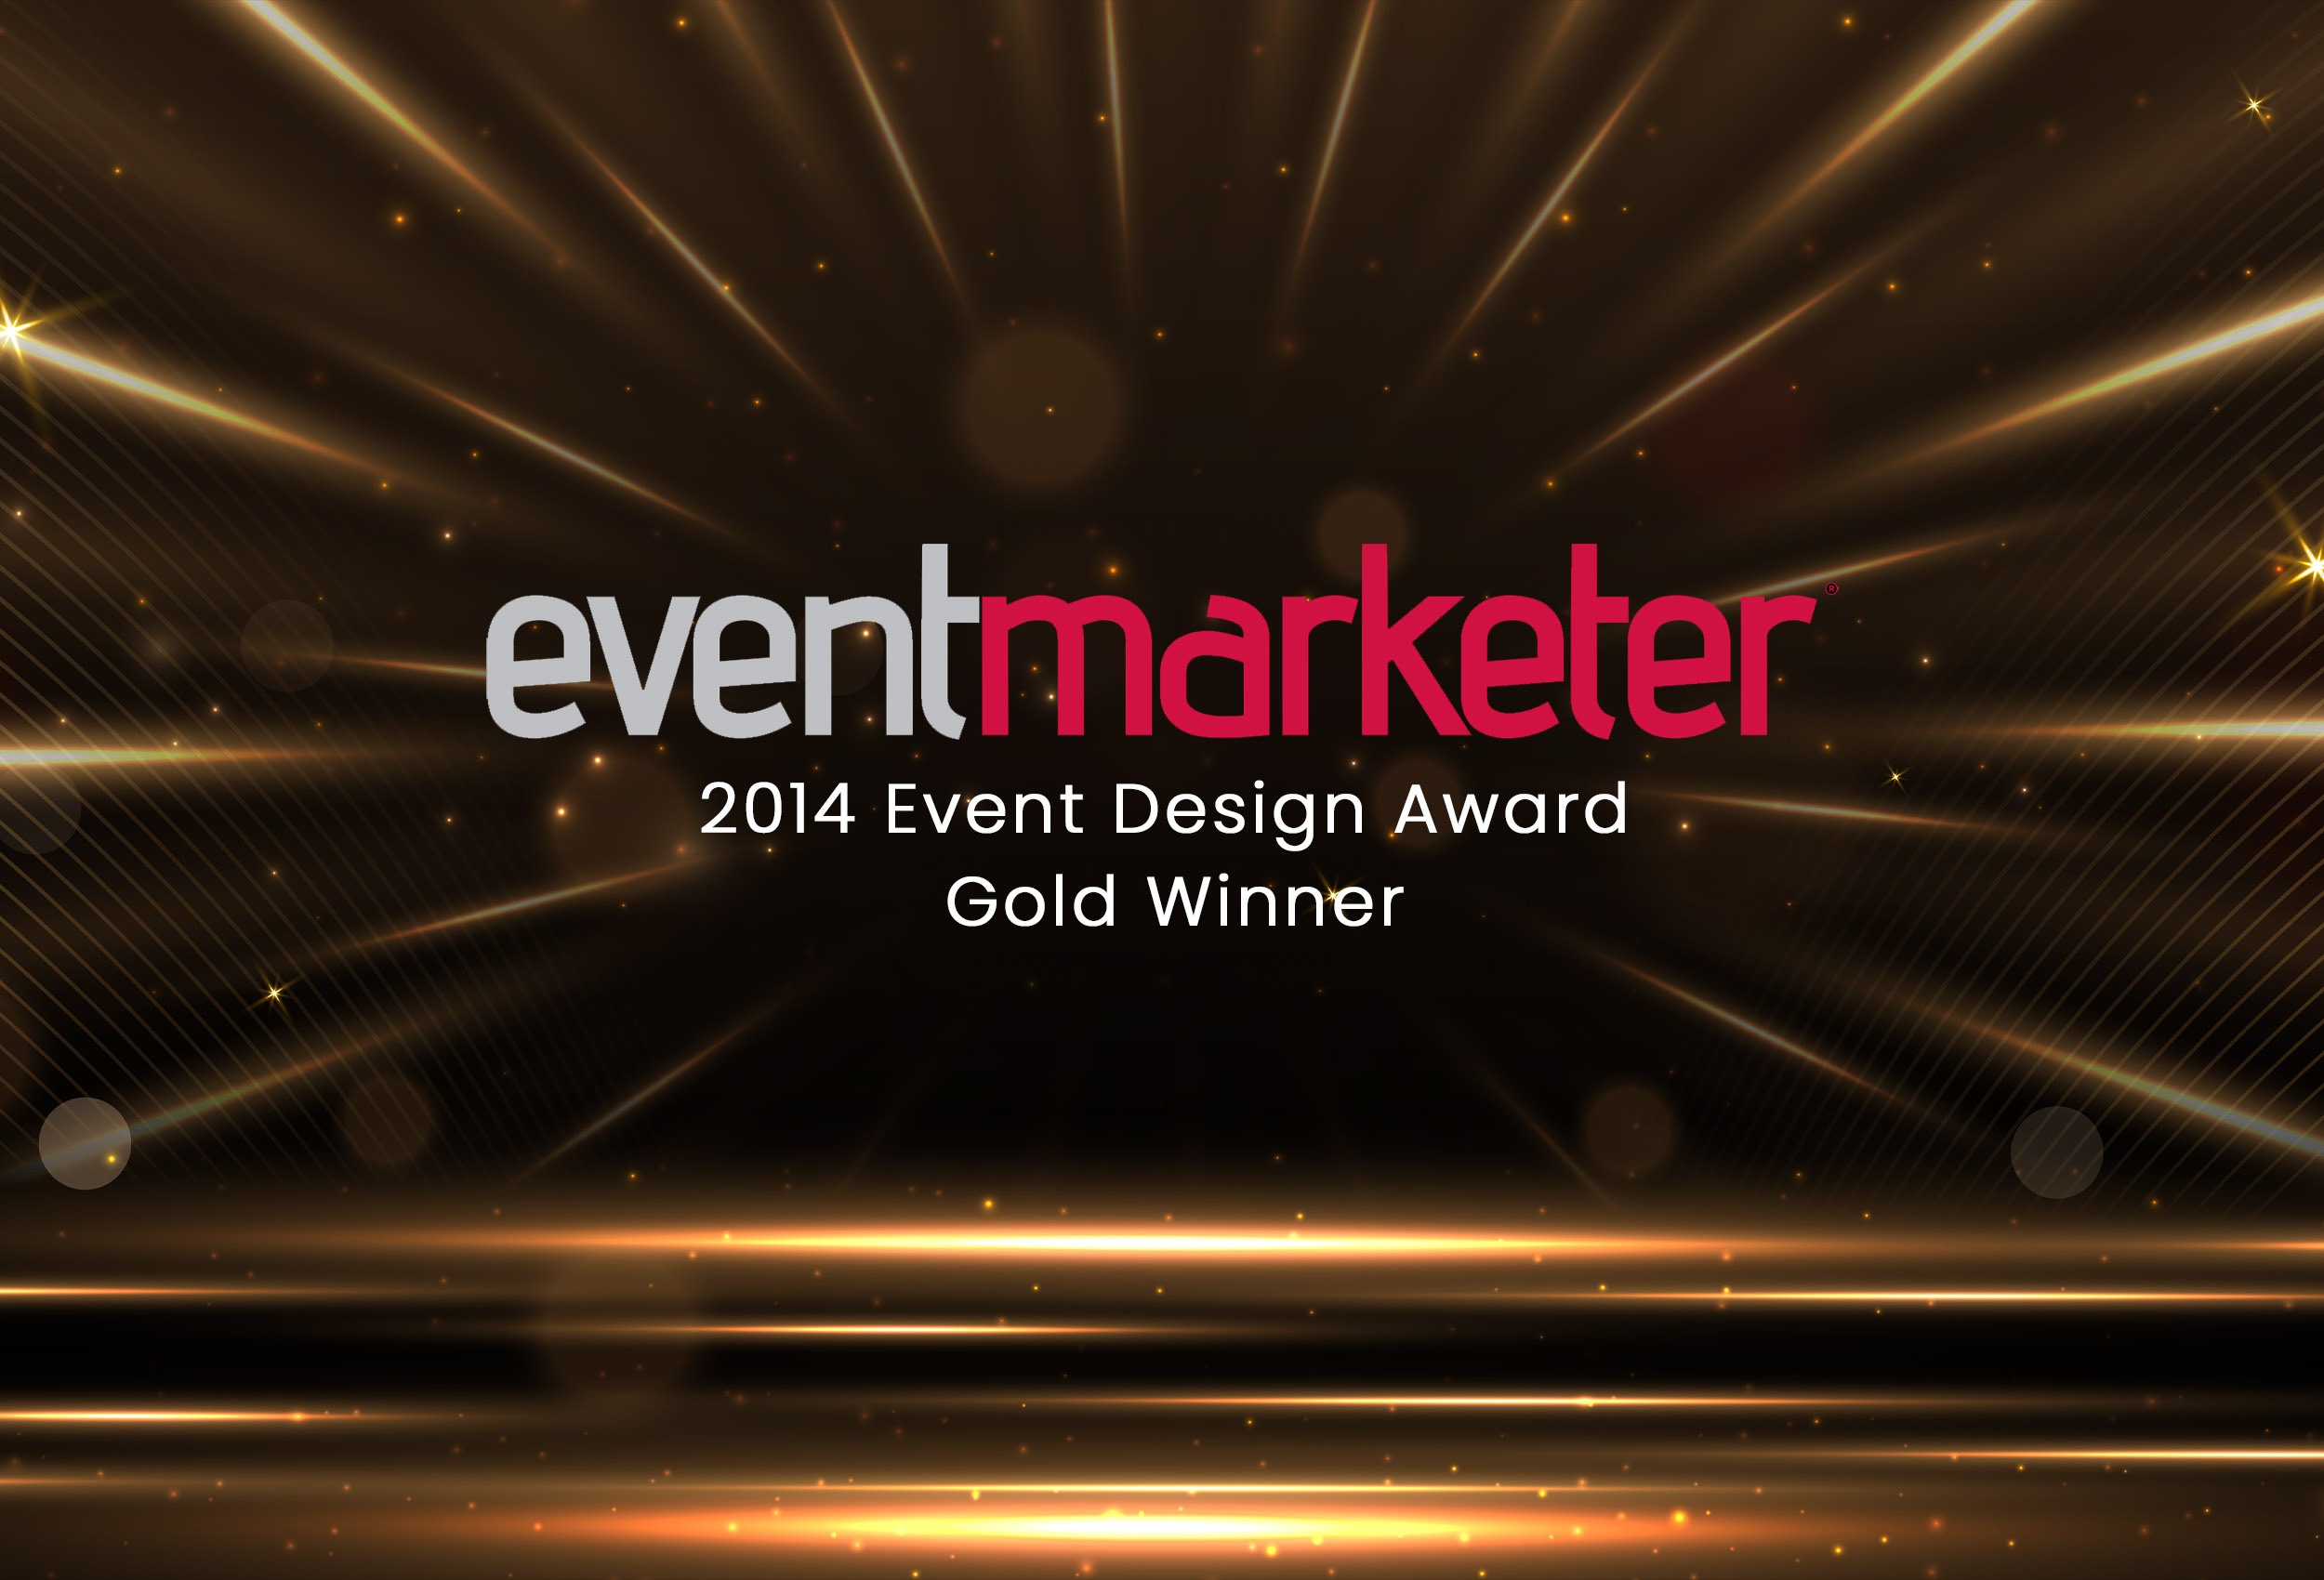 2020 Exhibits Wins Gold in Event Marketer Magazine’s 2014 Event Design Awards_2500x1700